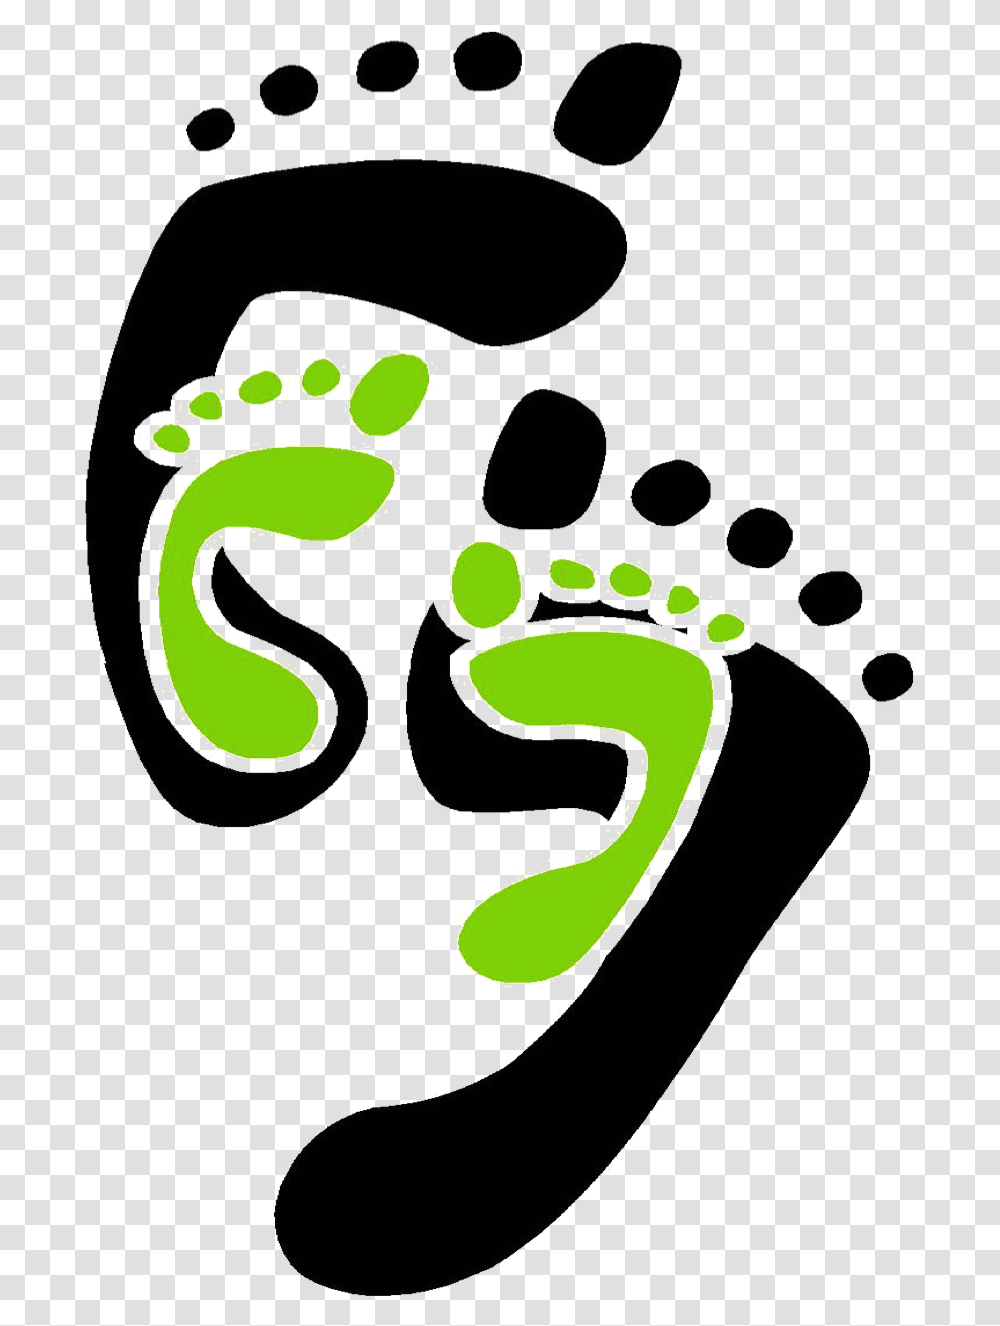 Clipart Library Kids Club Twinvalleybiblechapel Footsteps Of Jesus Clipart, Footprint, Green Transparent Png